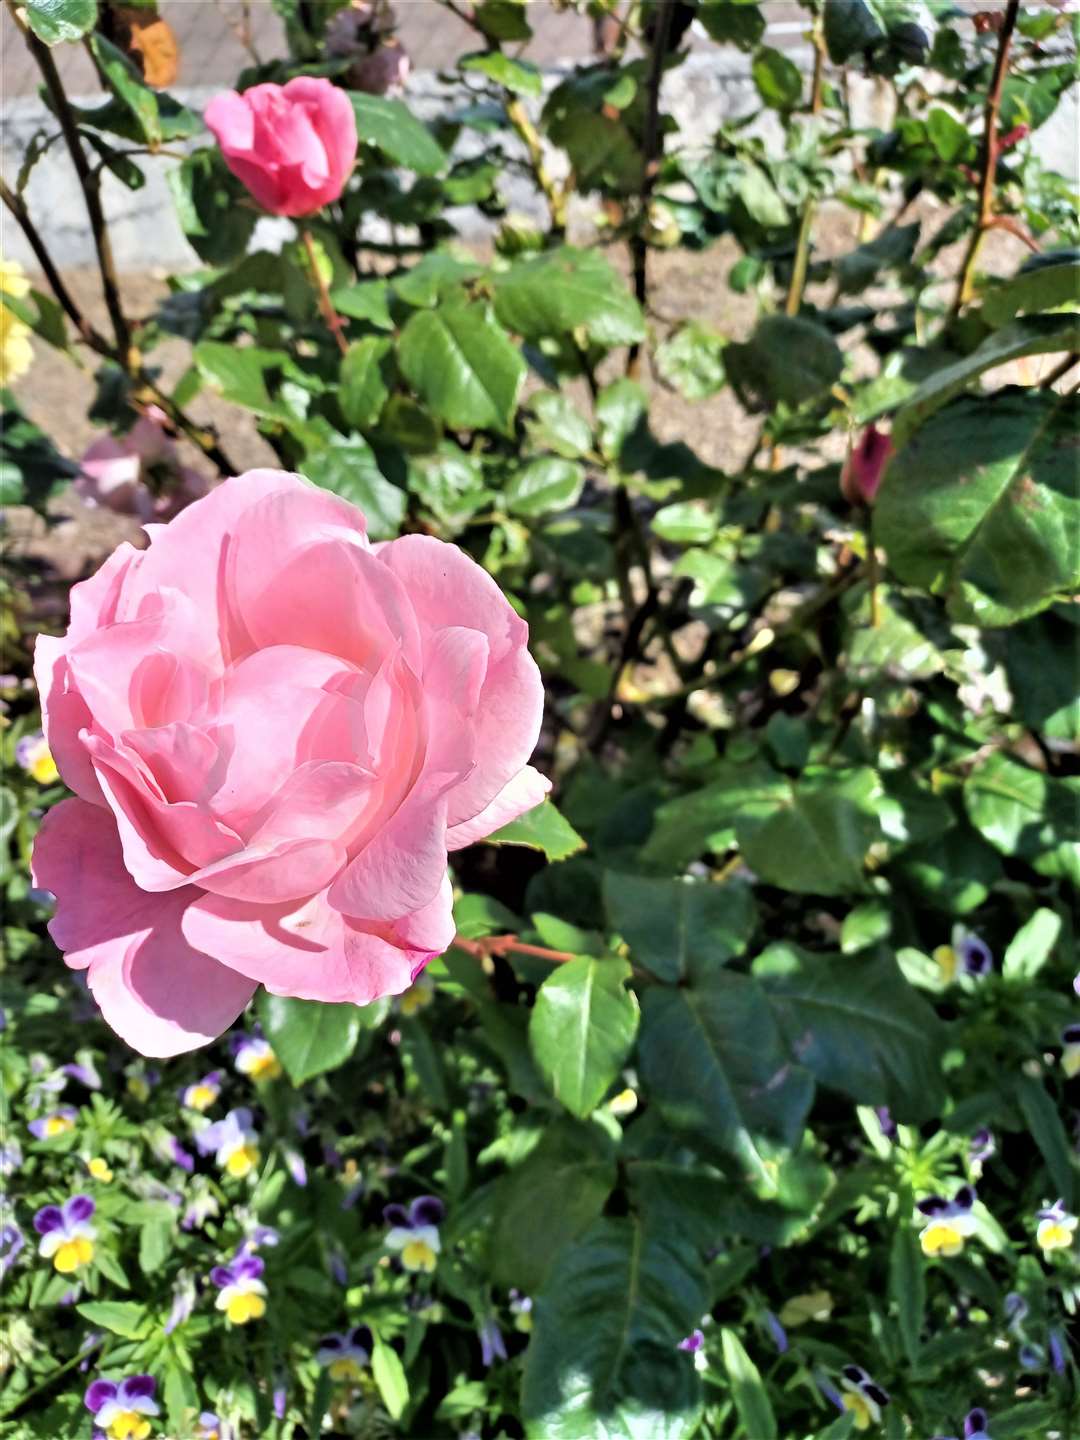 One of the flowers at Olrig Street is this Queen Elizabeth rose that was specially bred in 1954 by American rose fancier, Walter Lammerts in honour of Her Majesty ascending to the throne. 'This was the first plant I planted,' said Alexander Glasgow.